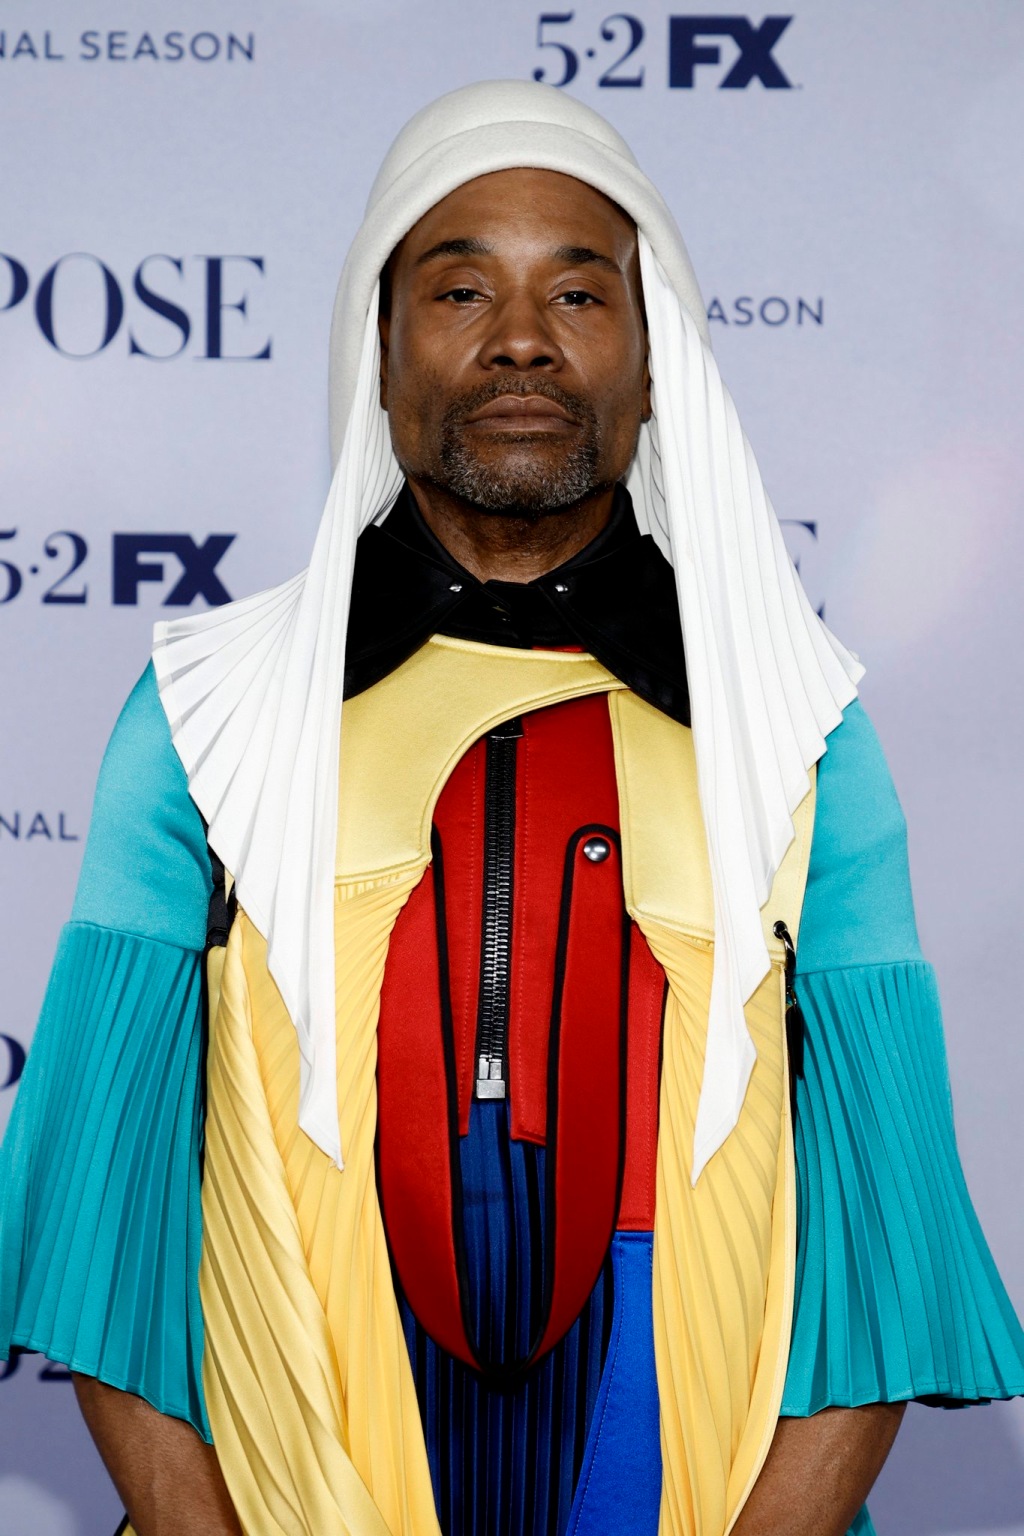 Billy Porter reveals he is HIV-positive